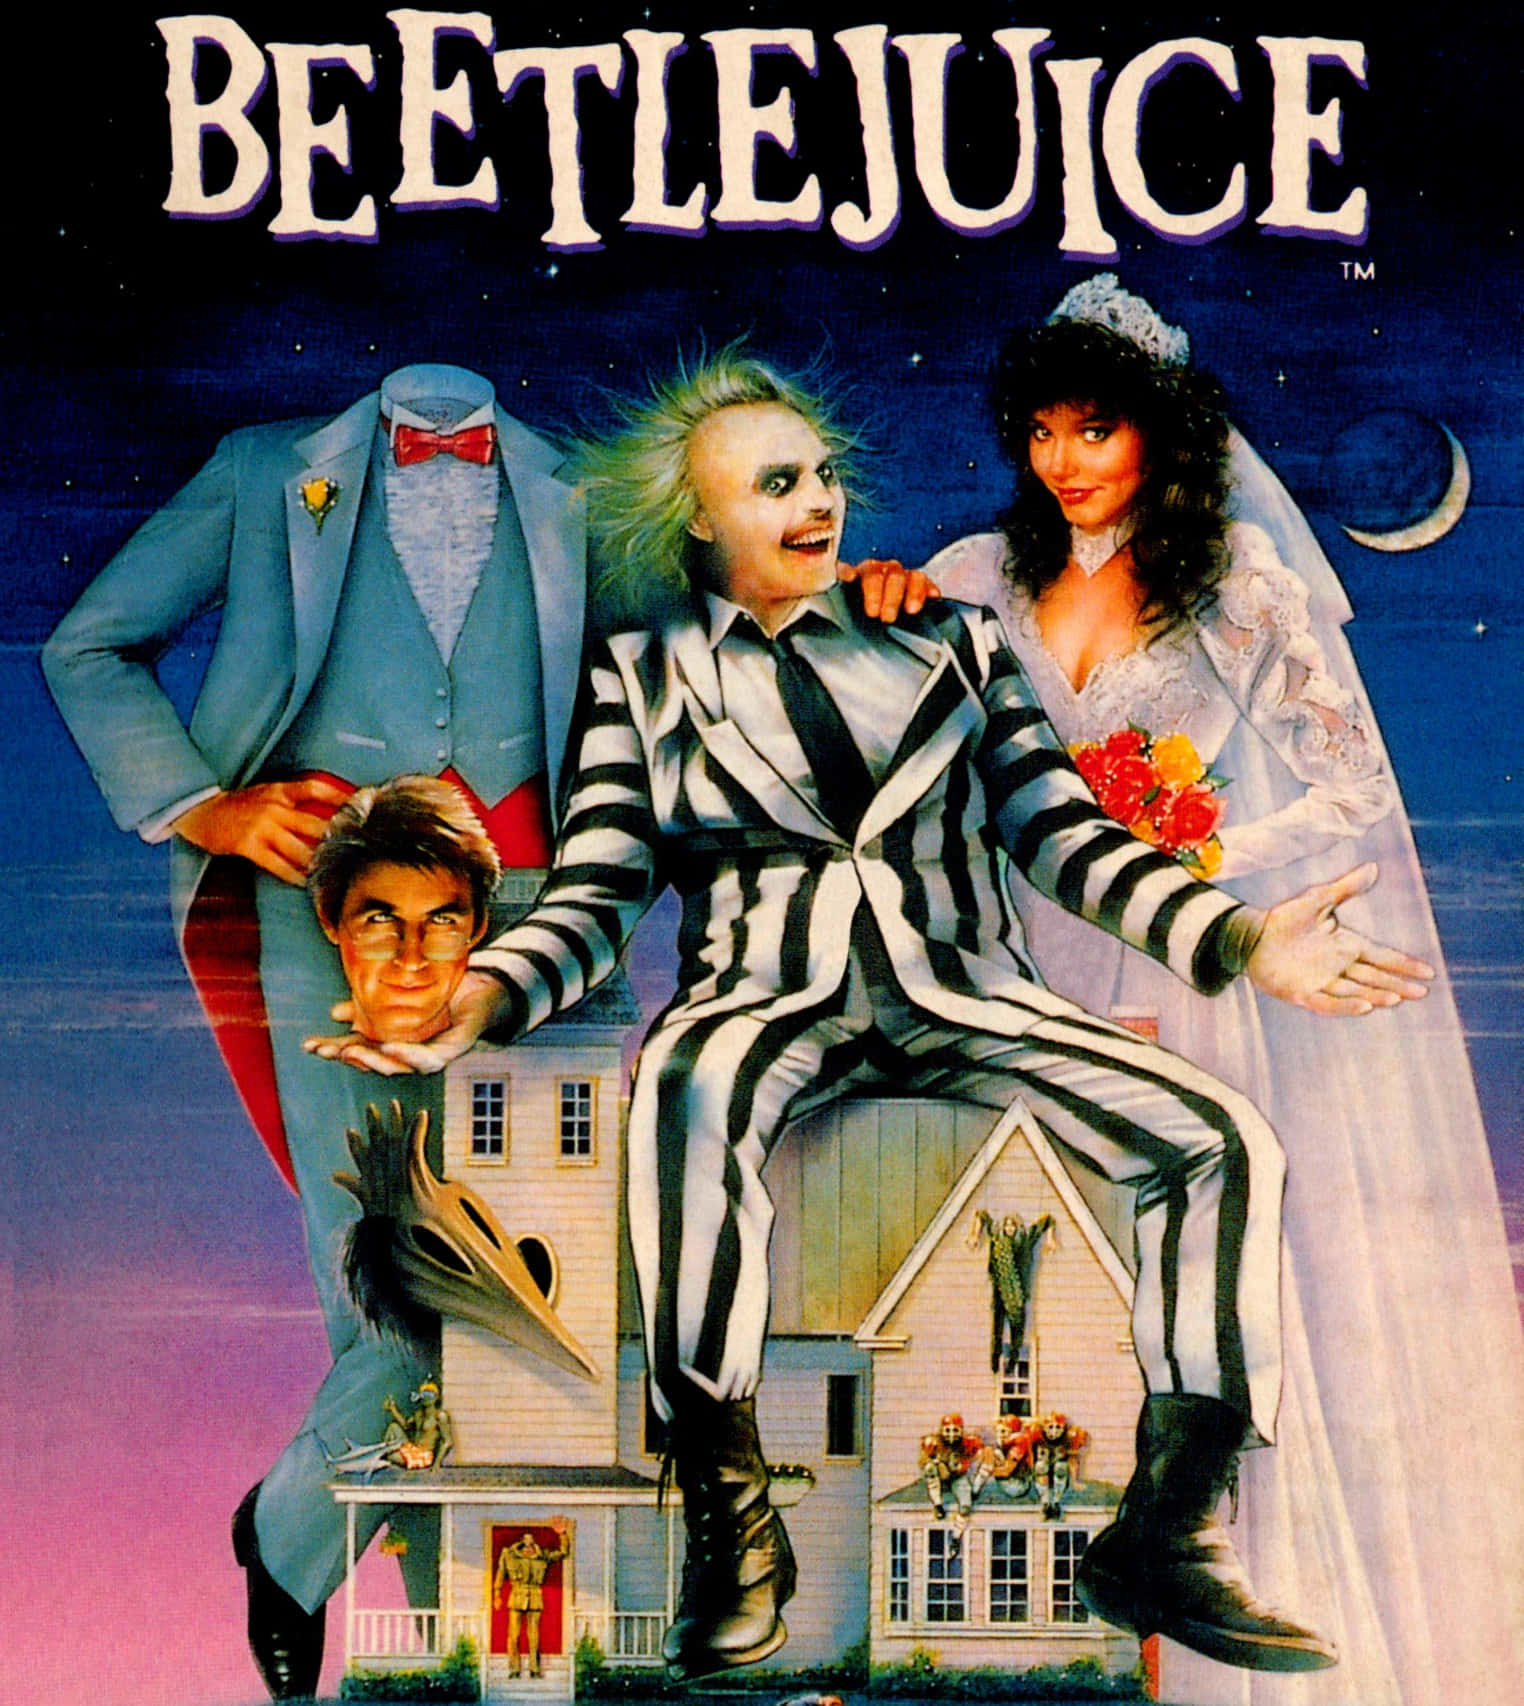 The iconic Beetlejuice in a haunting pose.